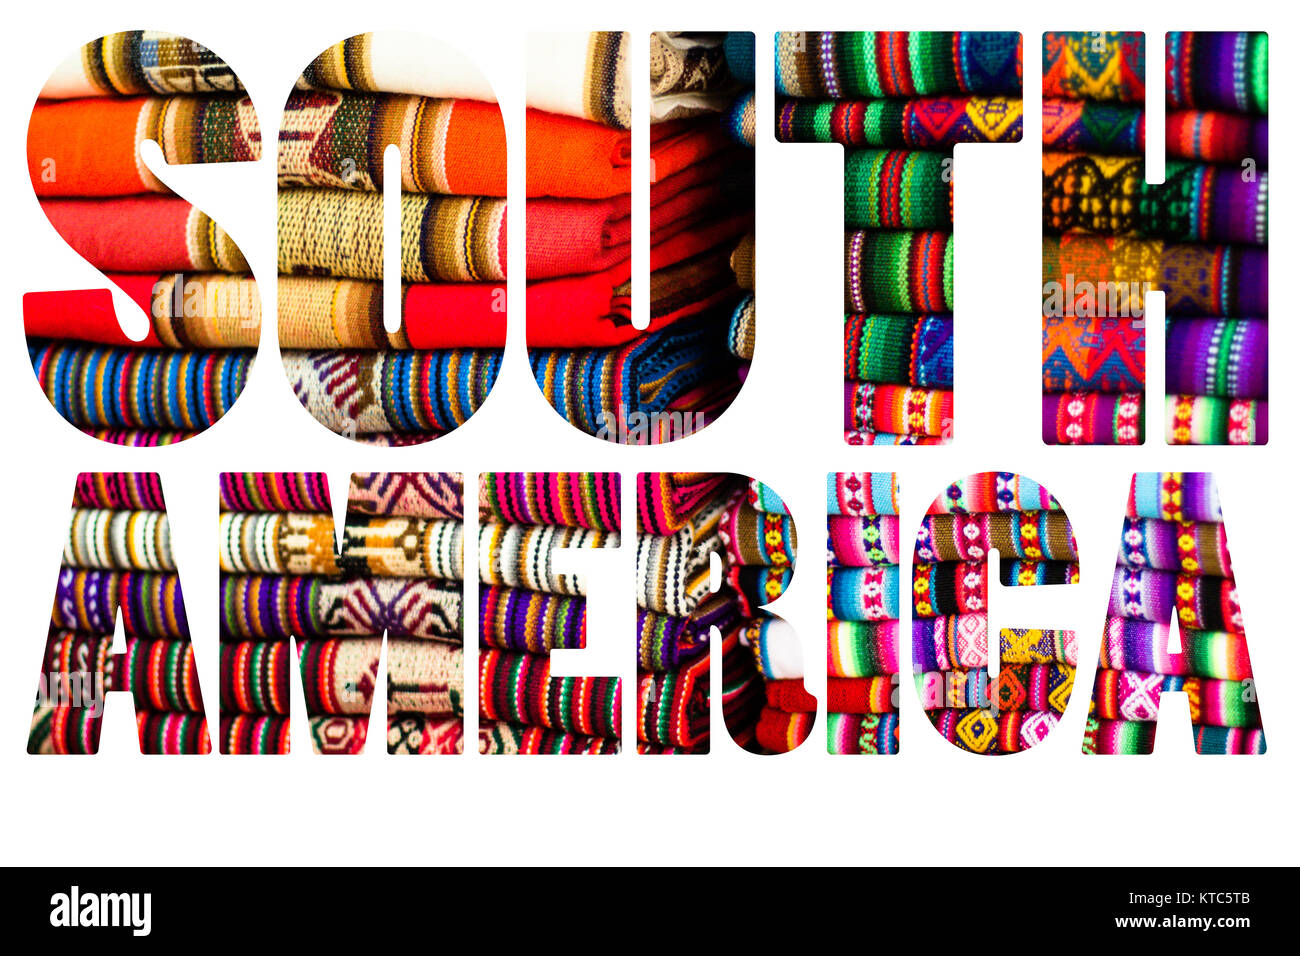 Colorful Fabric at market in Peru, South America Stock Photo